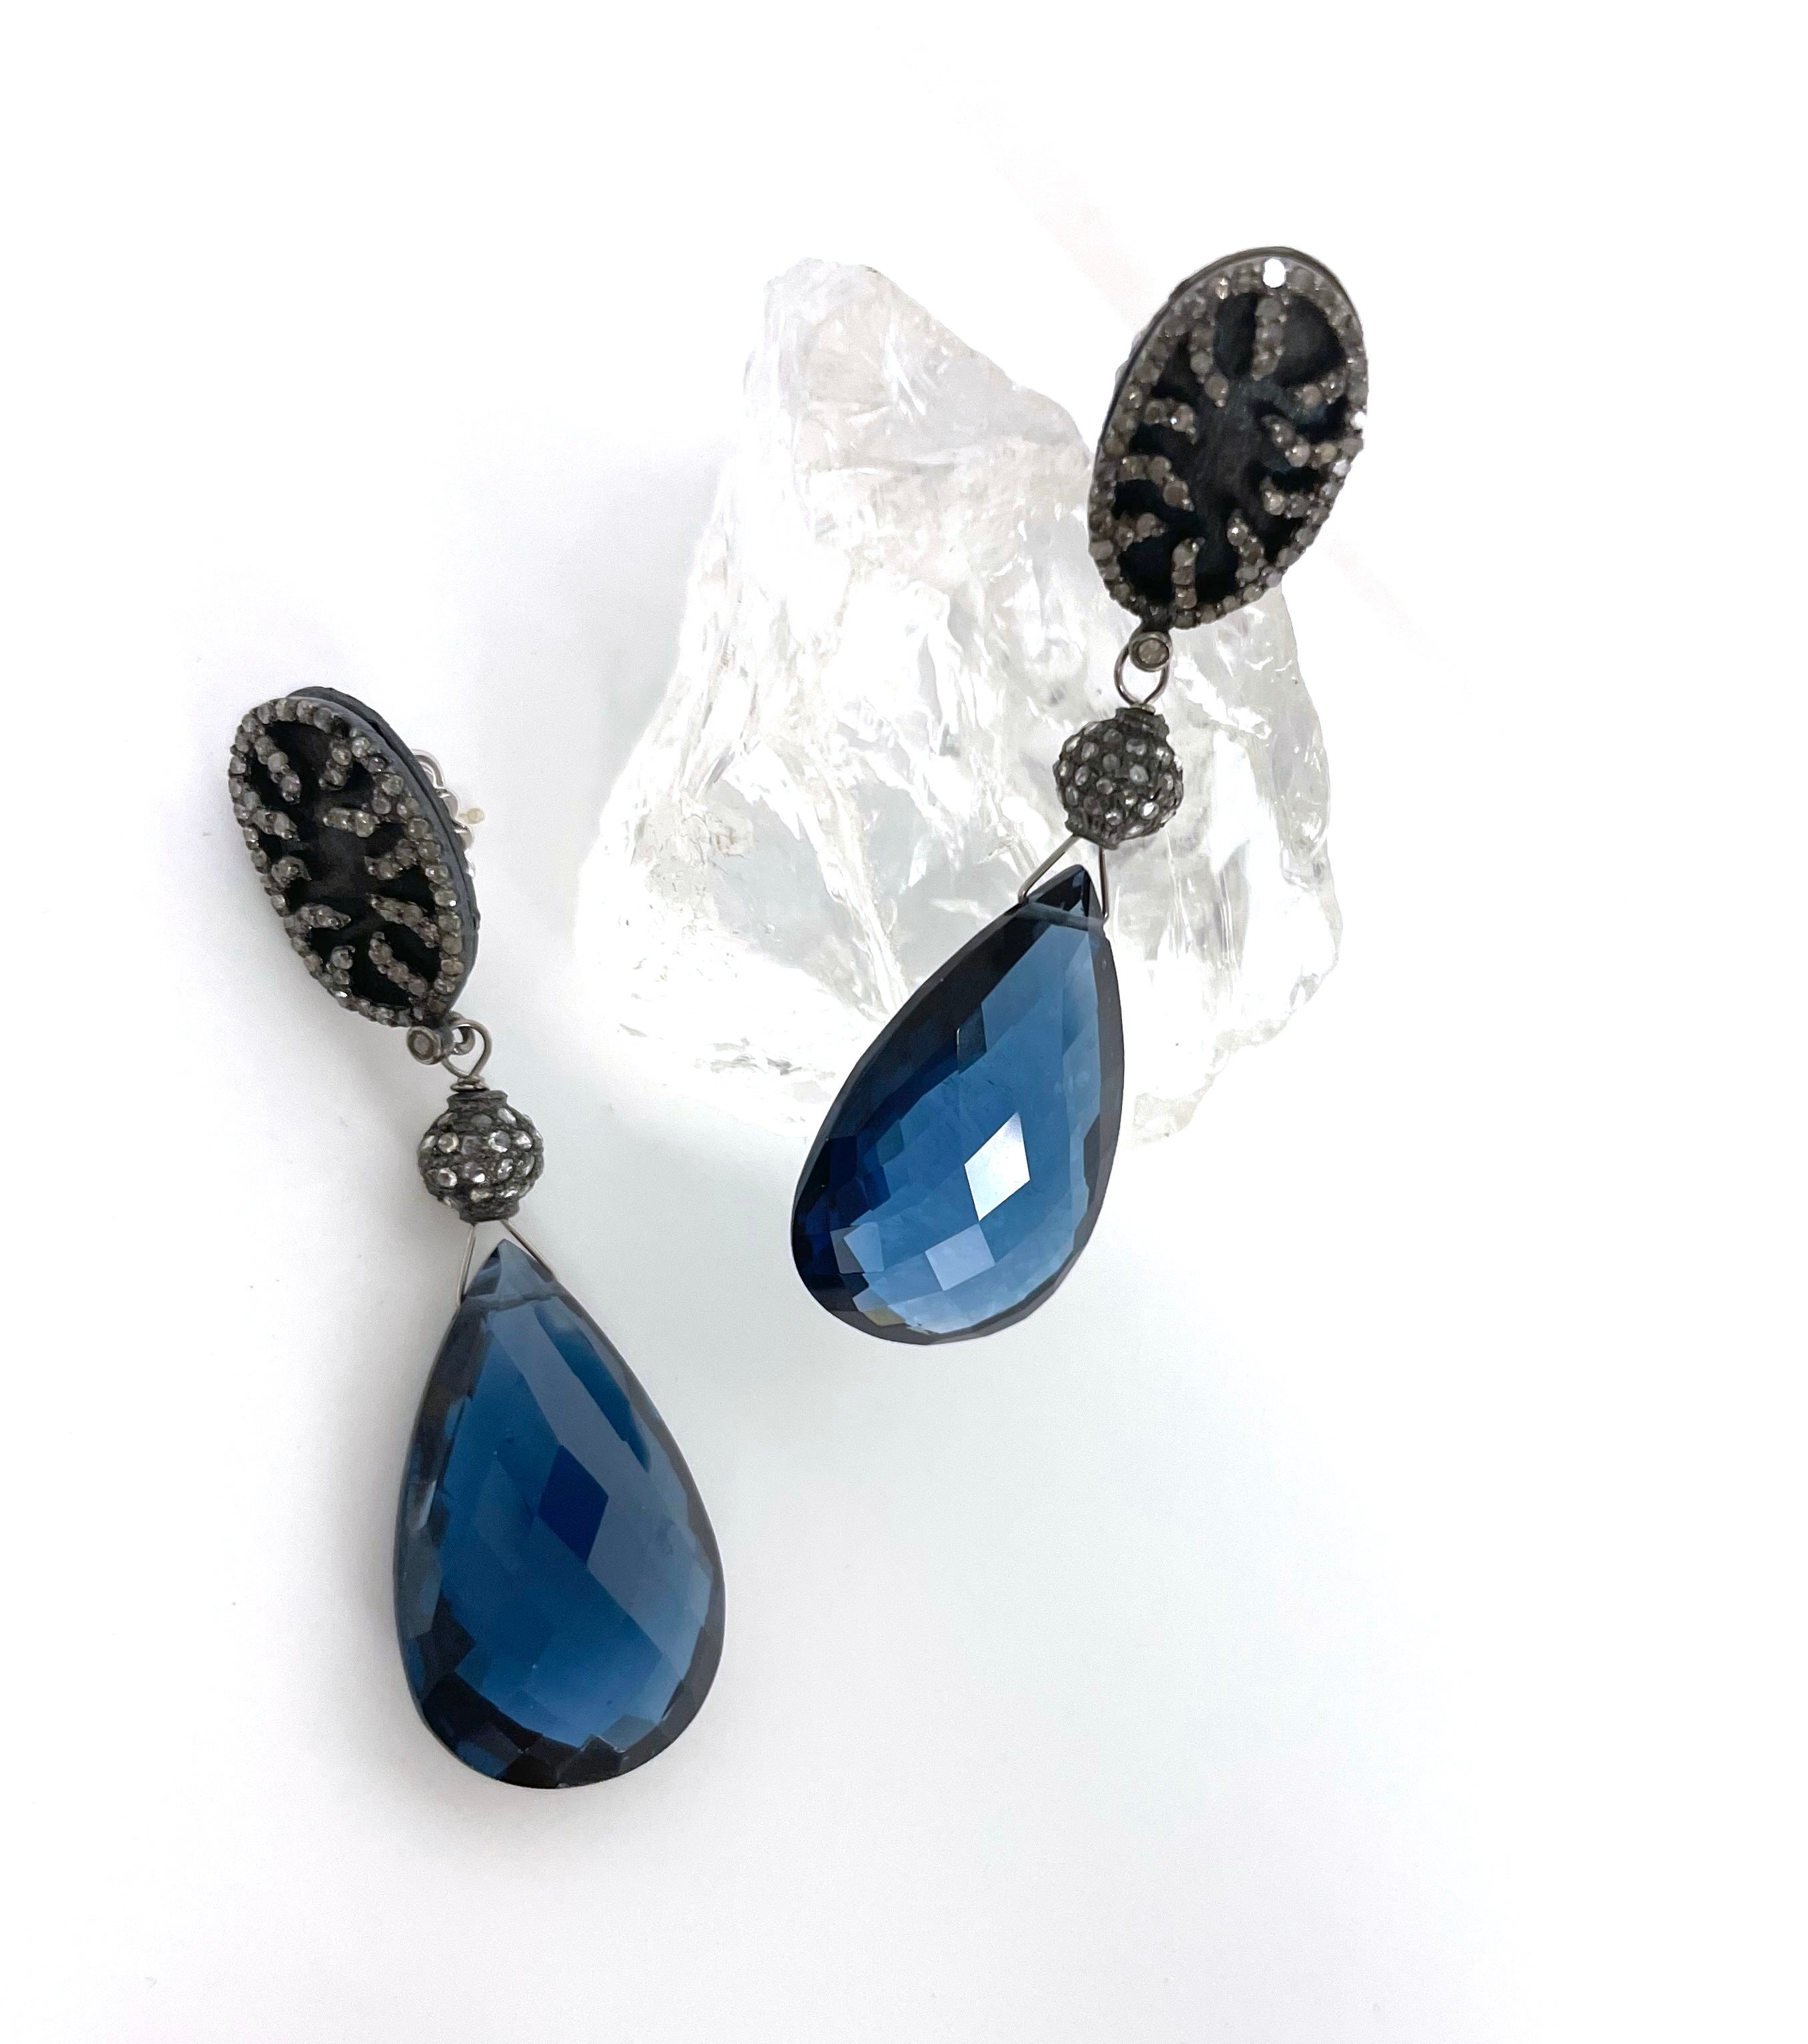 Description
The rich and exquisite color of these earrings doesn’t go unnoticed with its large teardrop London Blue quartz and Blue Titanium pave diamond studs. Item # E3210
Pair it with matching necklace (Item# N3648, short), matching bracelet